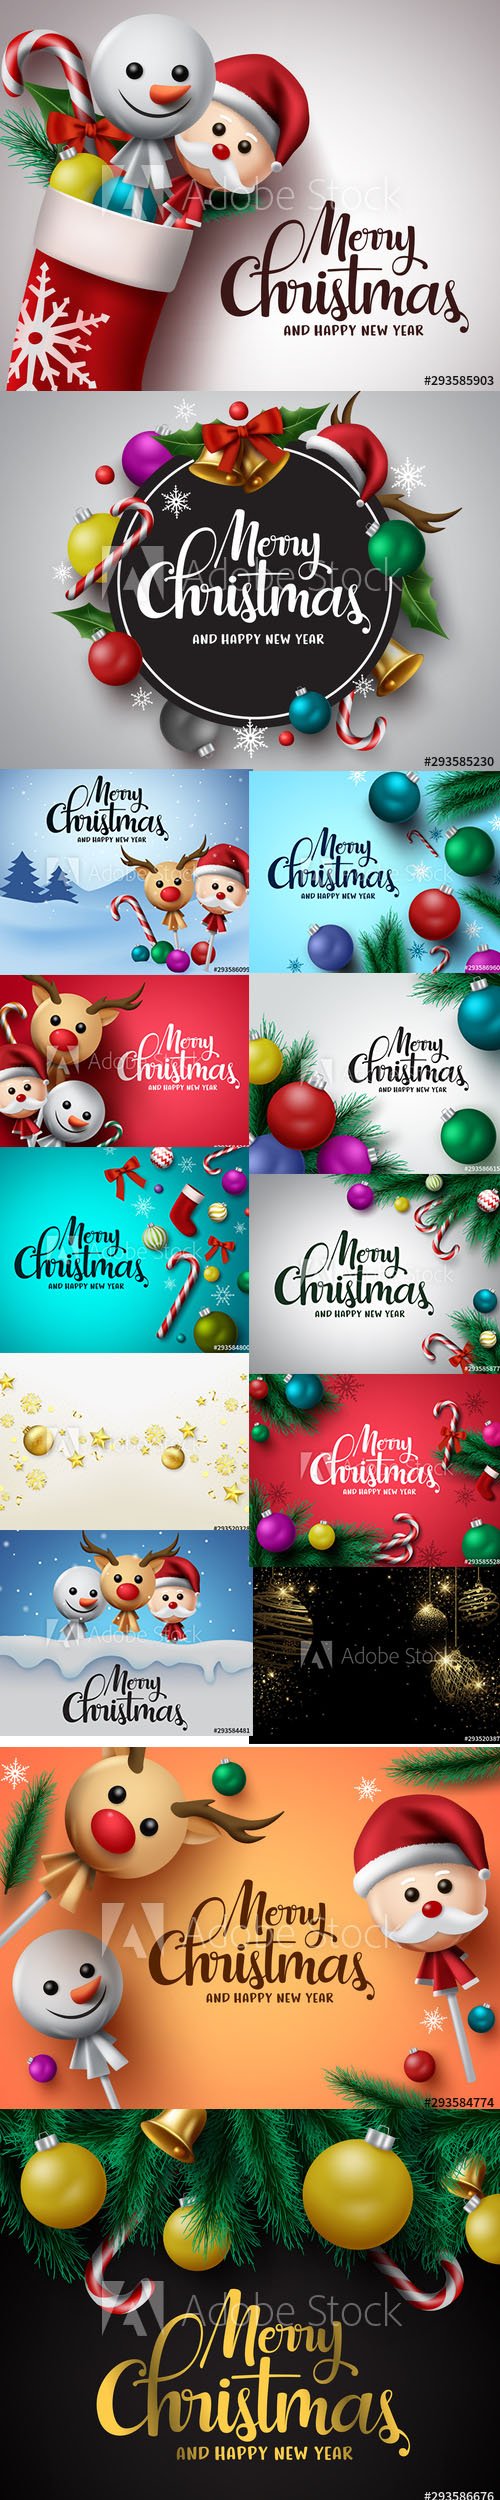 Merry Christmas and Happy New Year Backgrounds Template with Decor